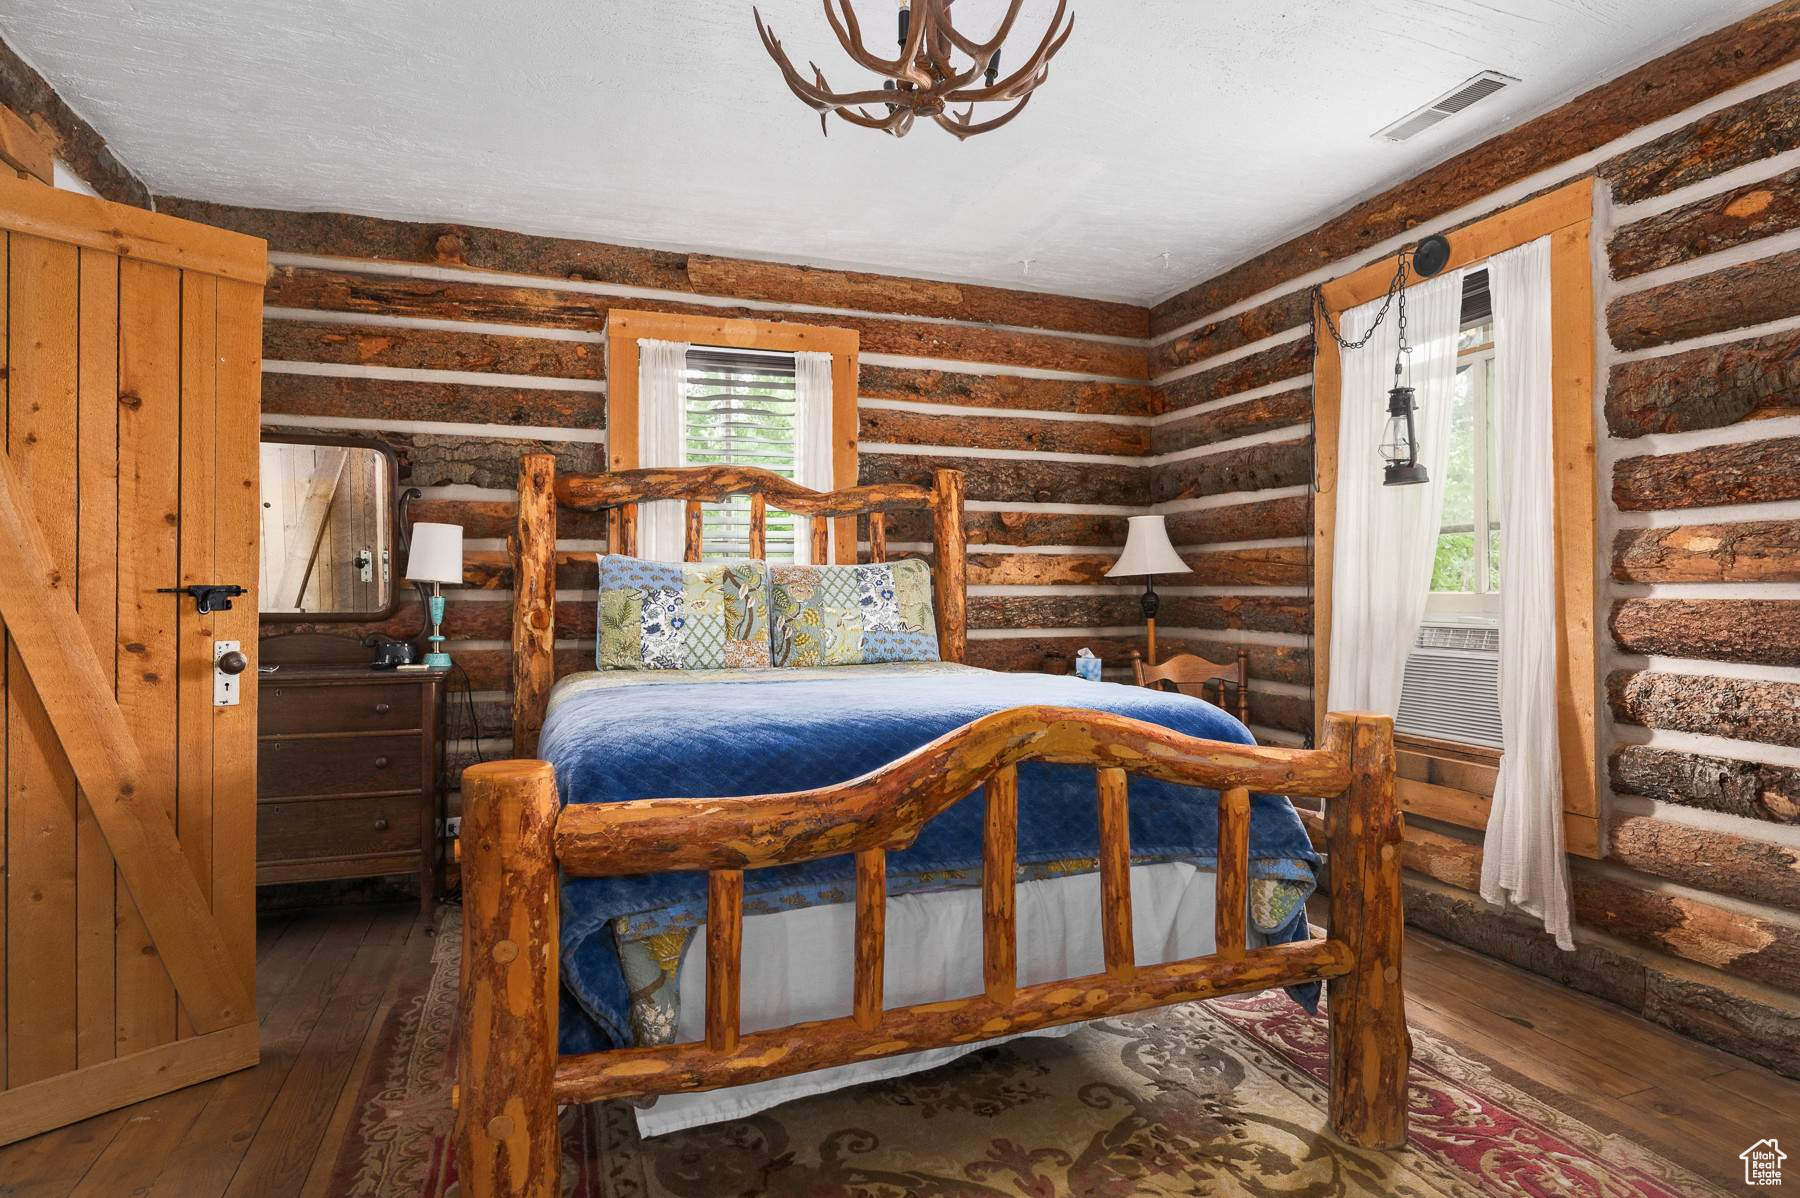 Bedroom featuring rustic walls, a notable chandelier, and hardwood / wood-style floors